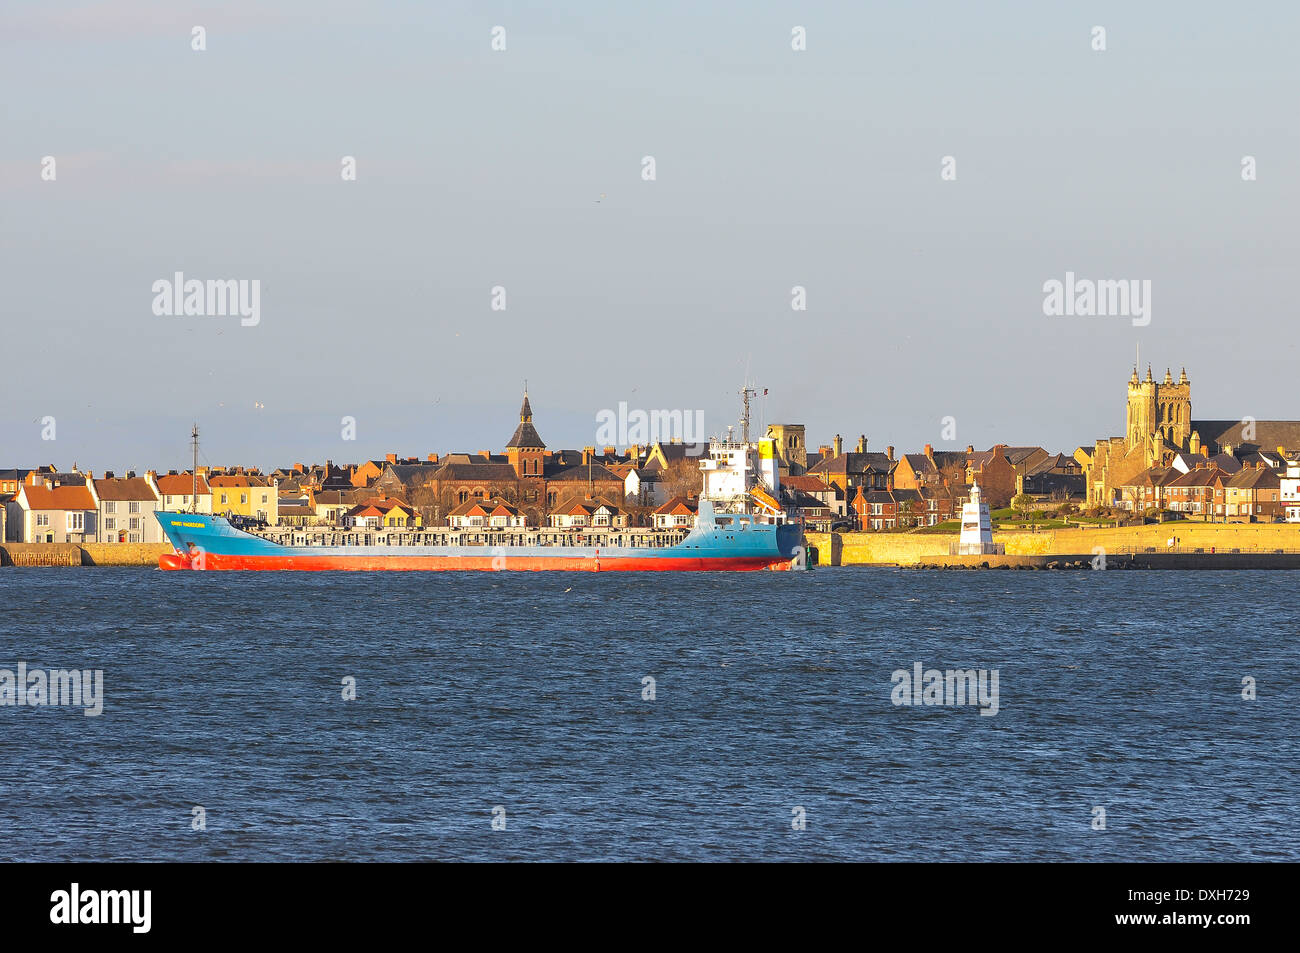 A large blue and red ship passes closes to houses and a church on the historic Headland of Hartlepool in north east England, UK. Stock Photo